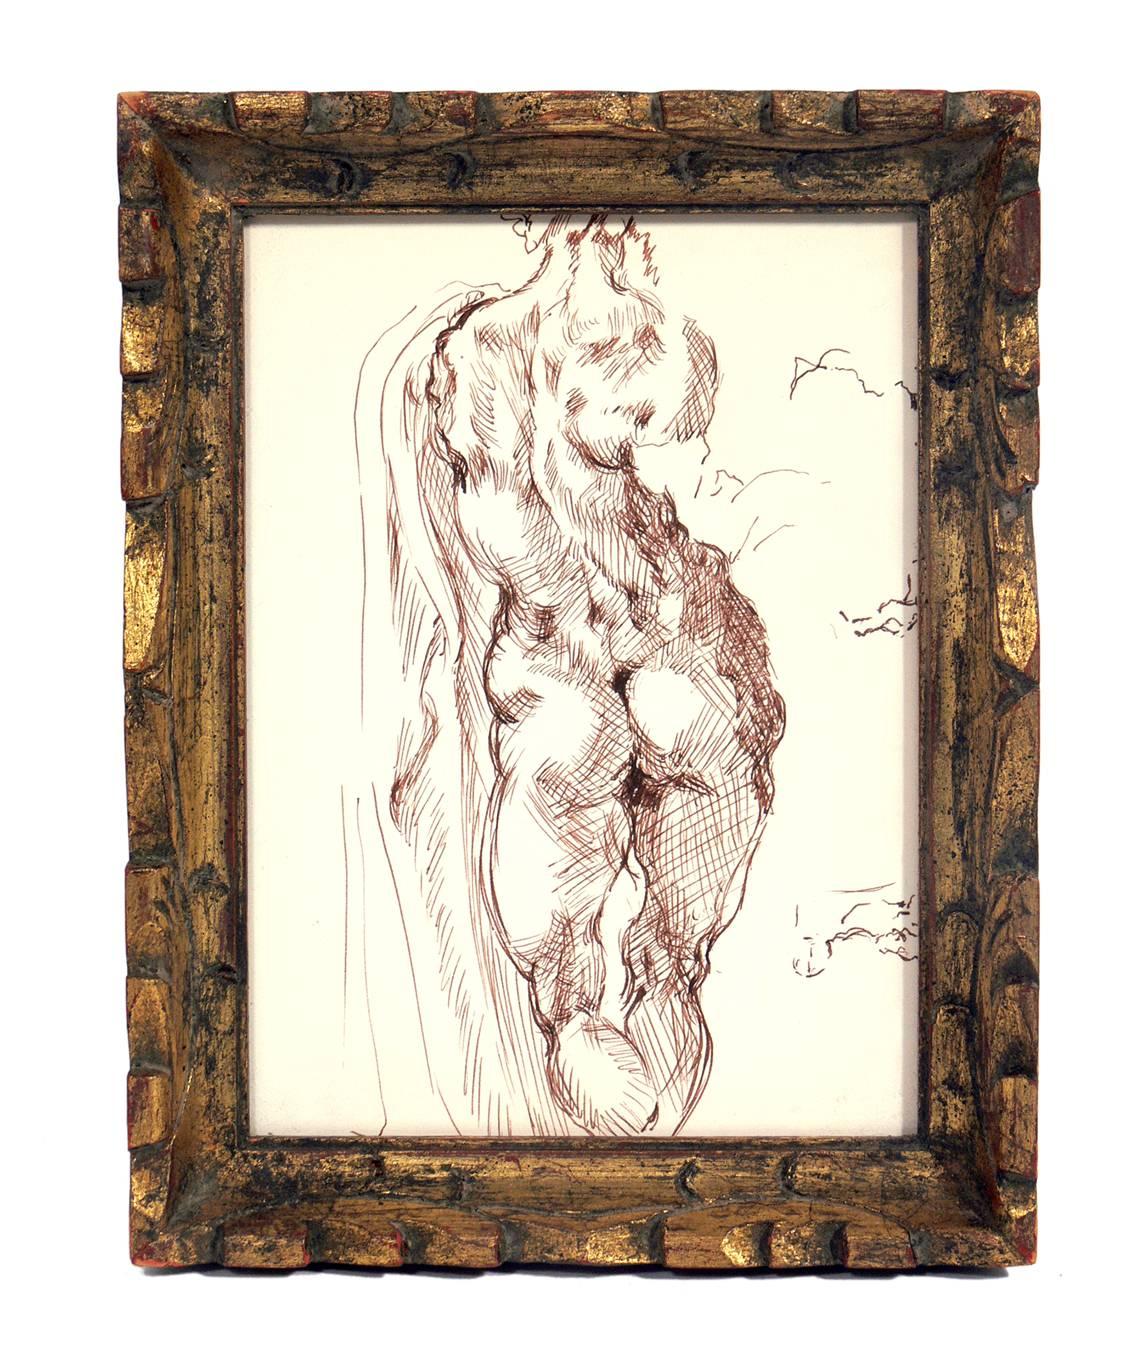 Selection of Figural Nude Drawings or Gallery Wall 1